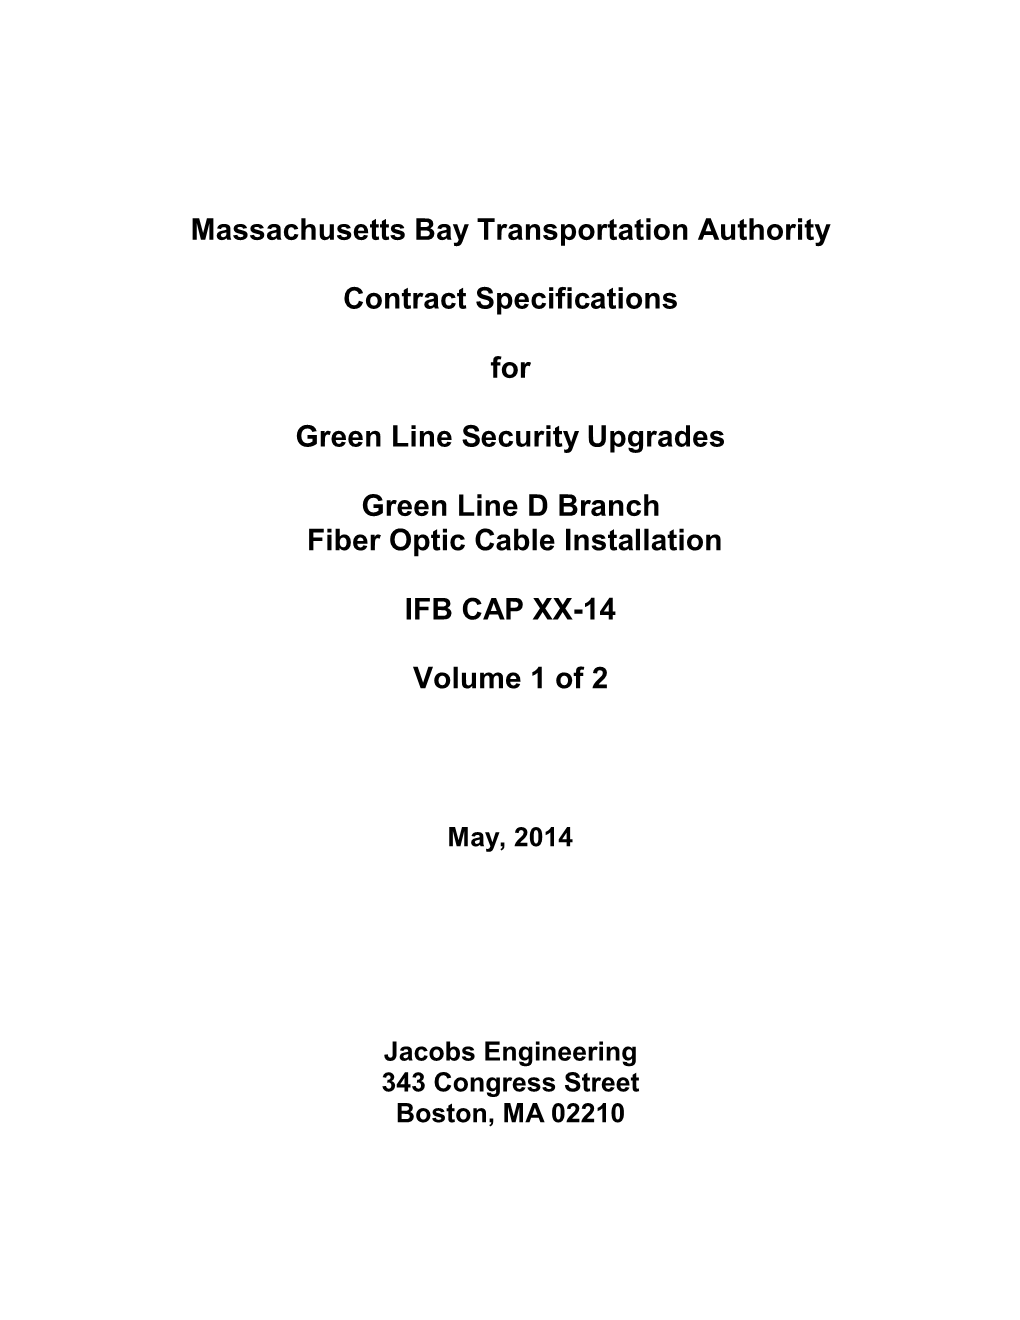 Massachusetts Bay Transportation Authority Contract Specifications For